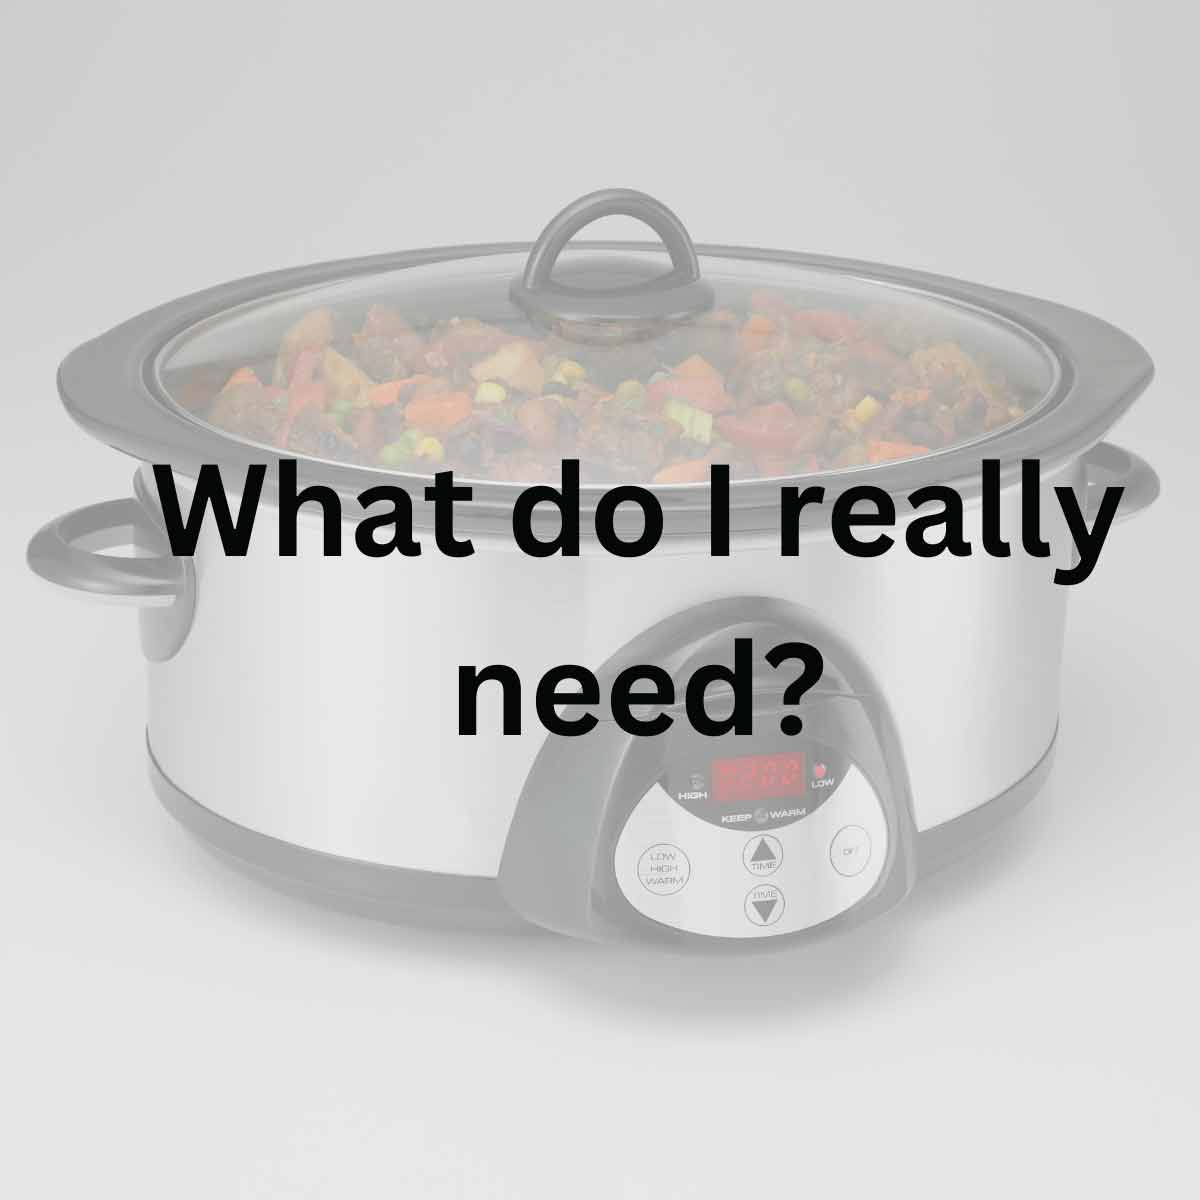 What do I really need? 7 quart stainless steel slow cooker with food inside and the lid on.